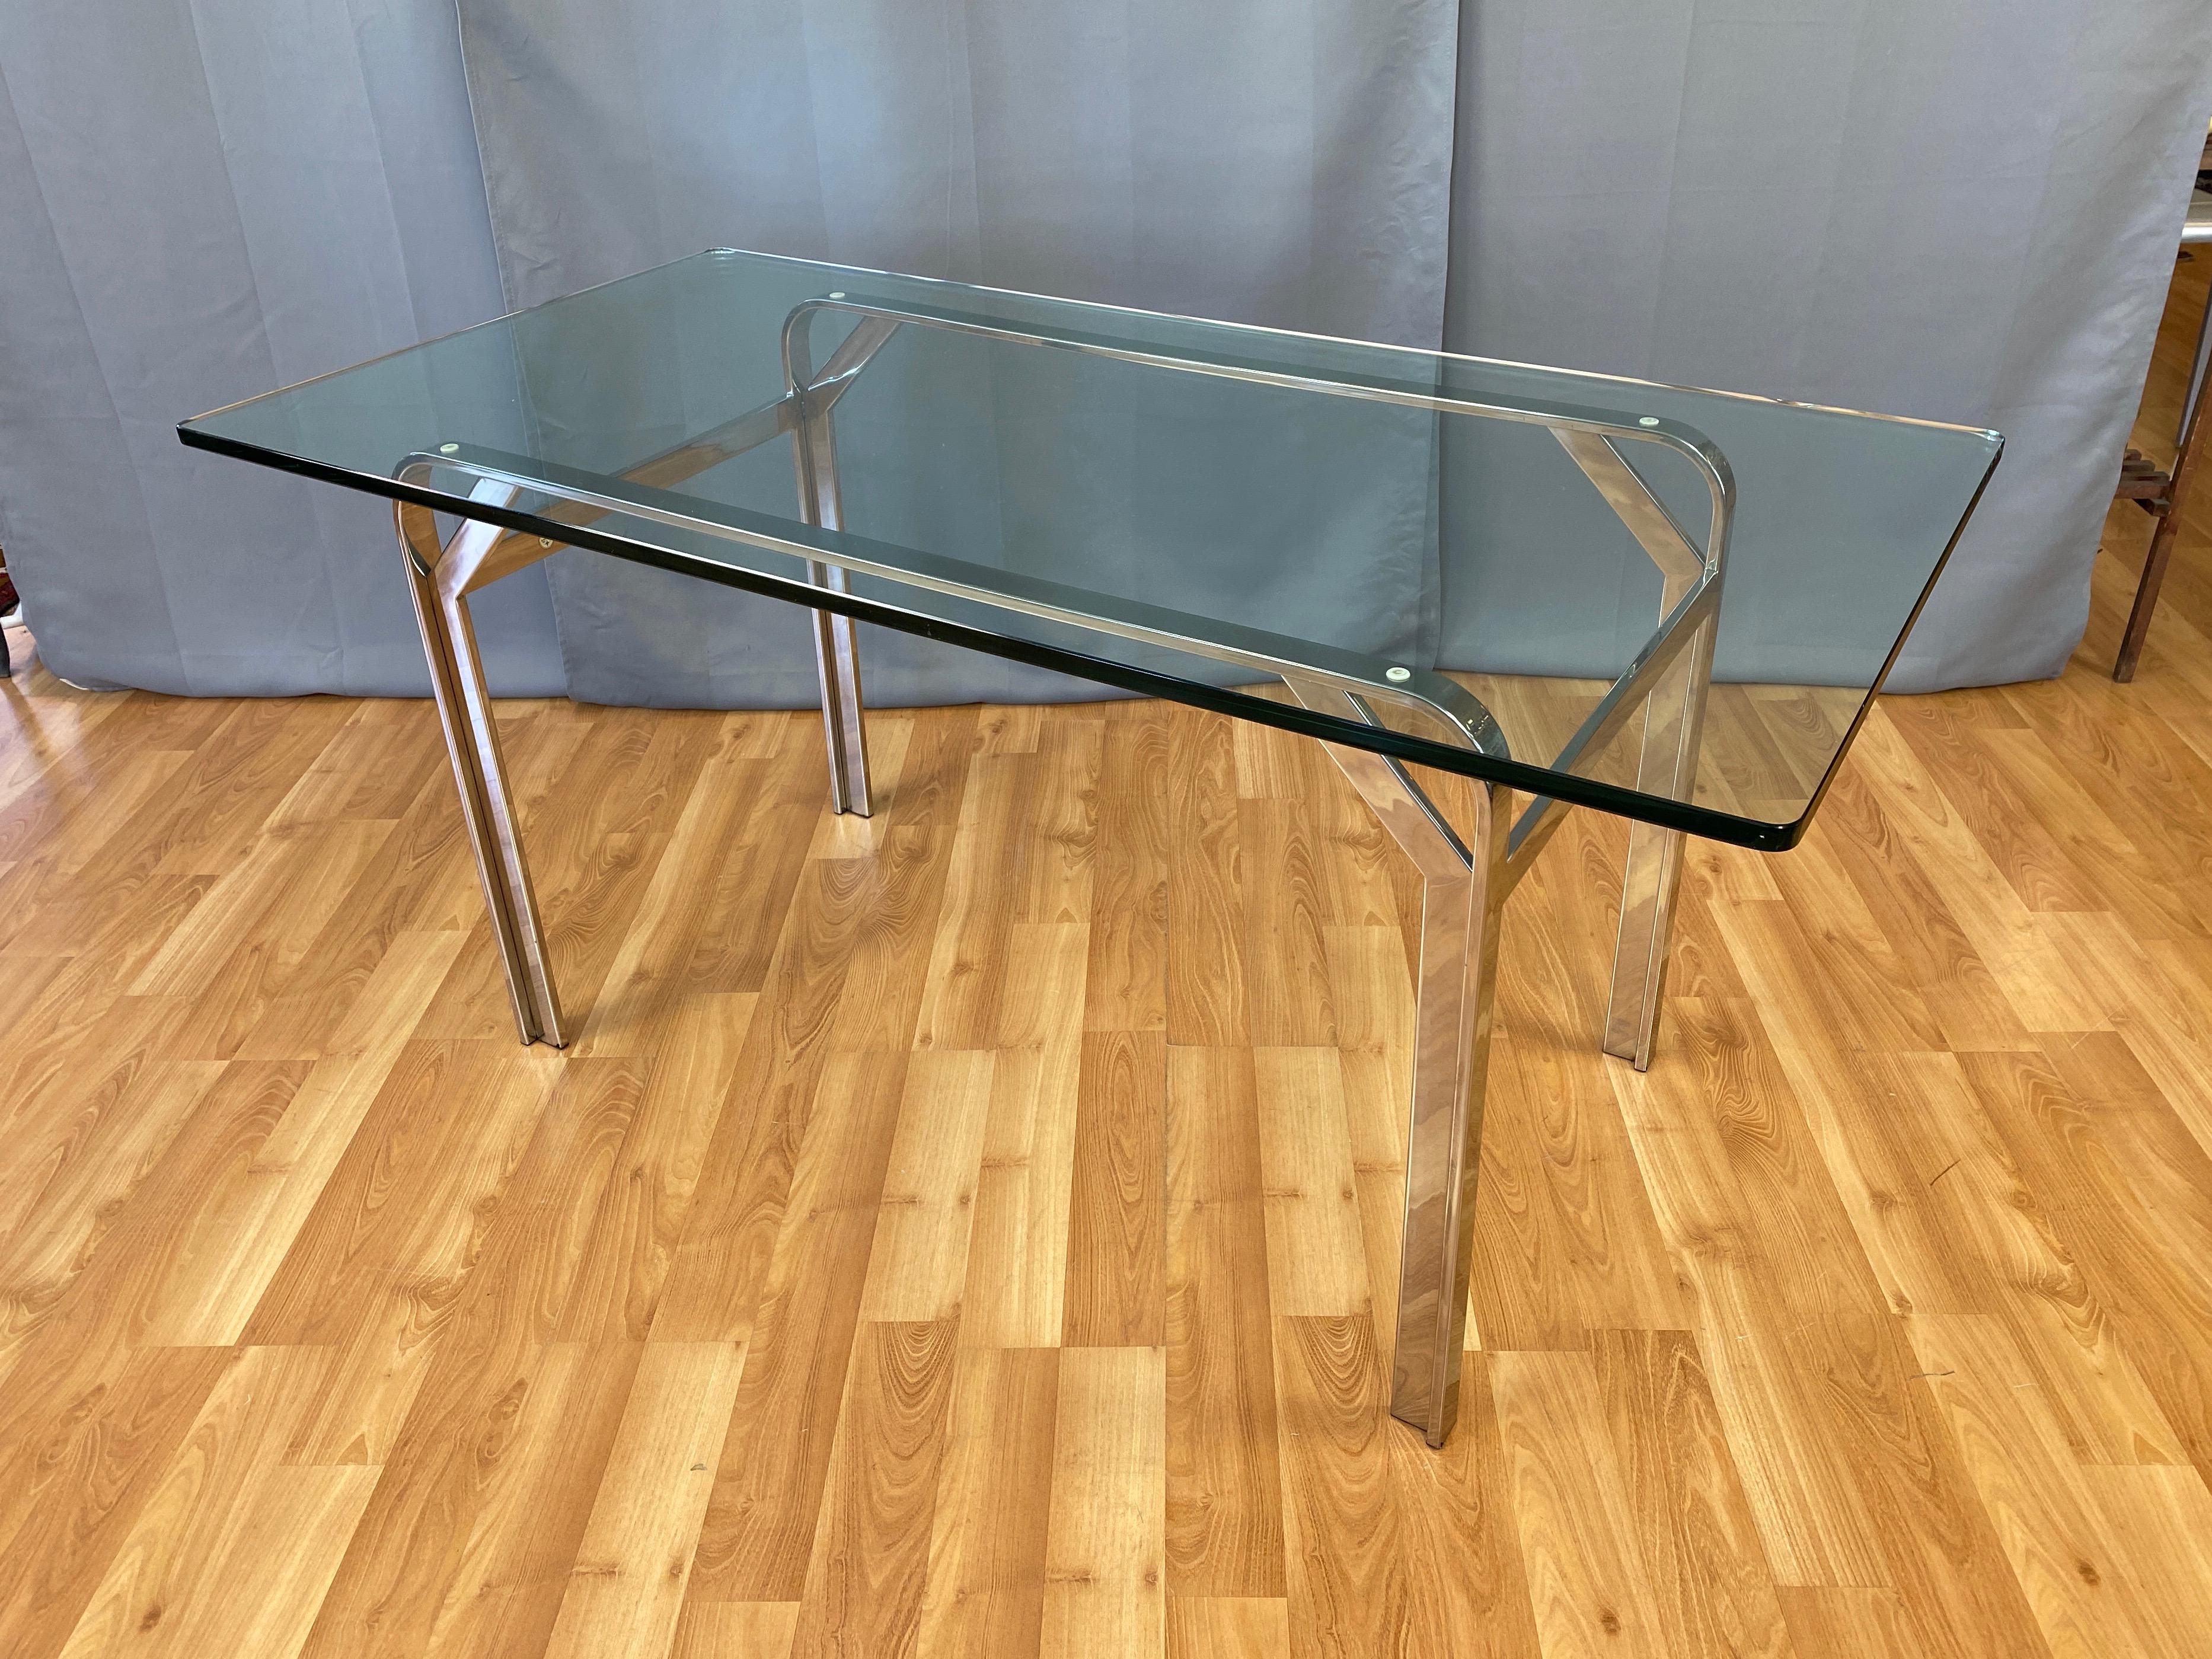 Steelcase Polished Nickel-Plated Steel Desk or Table with Glass Top, 1970s 9